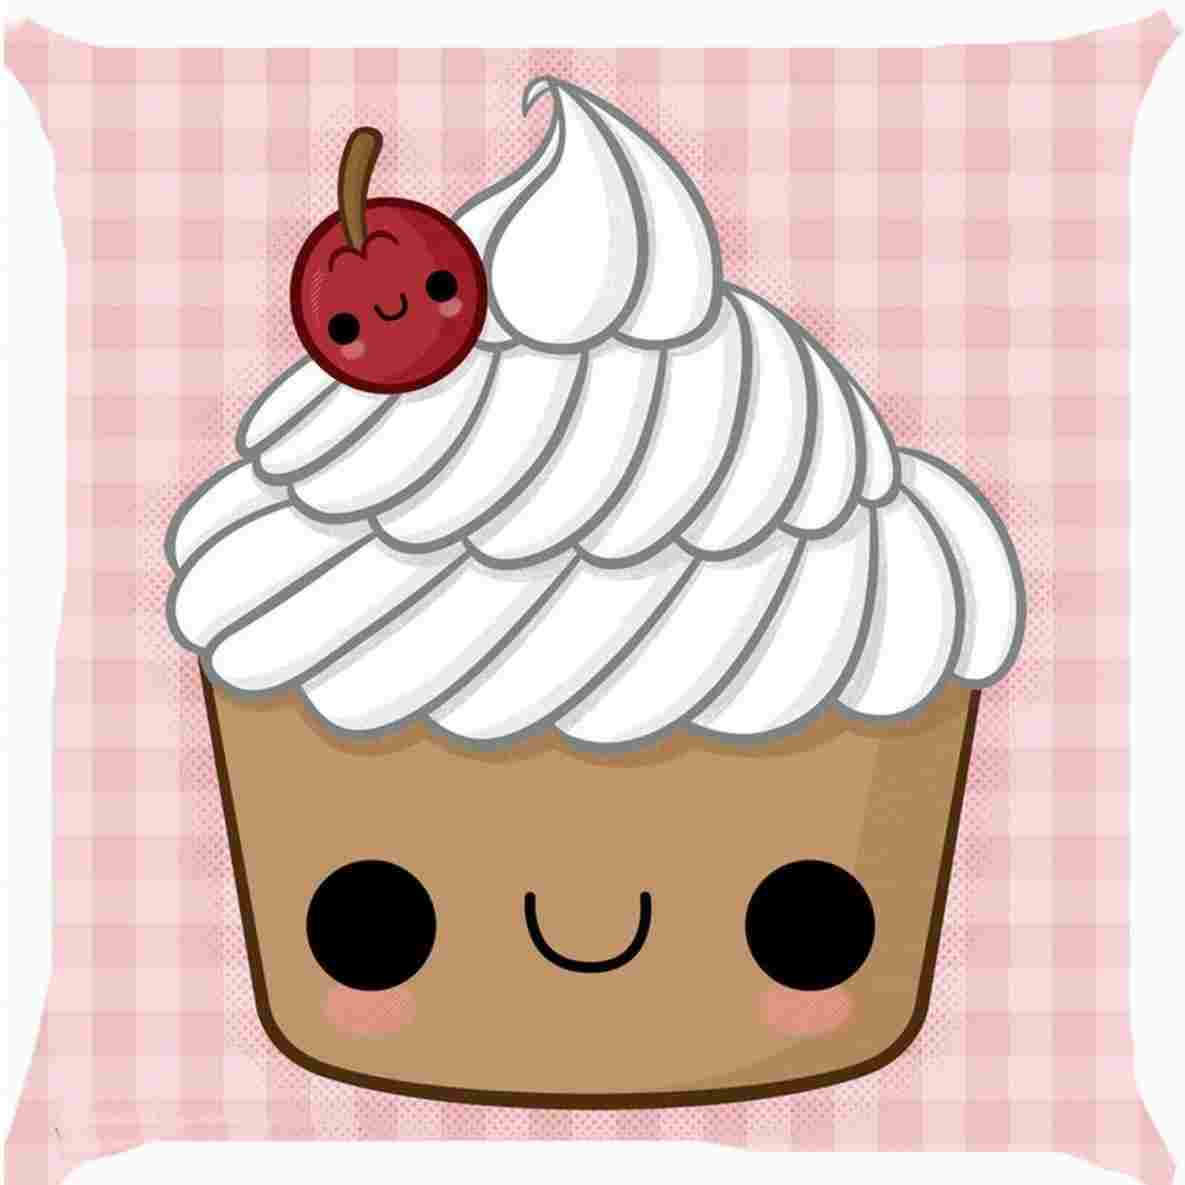 CUTE FOOD DRAWING : HOW TO DRAW A SUPER CUTE AND EASY CUPCAKE STEP BY STEP  - YouTube